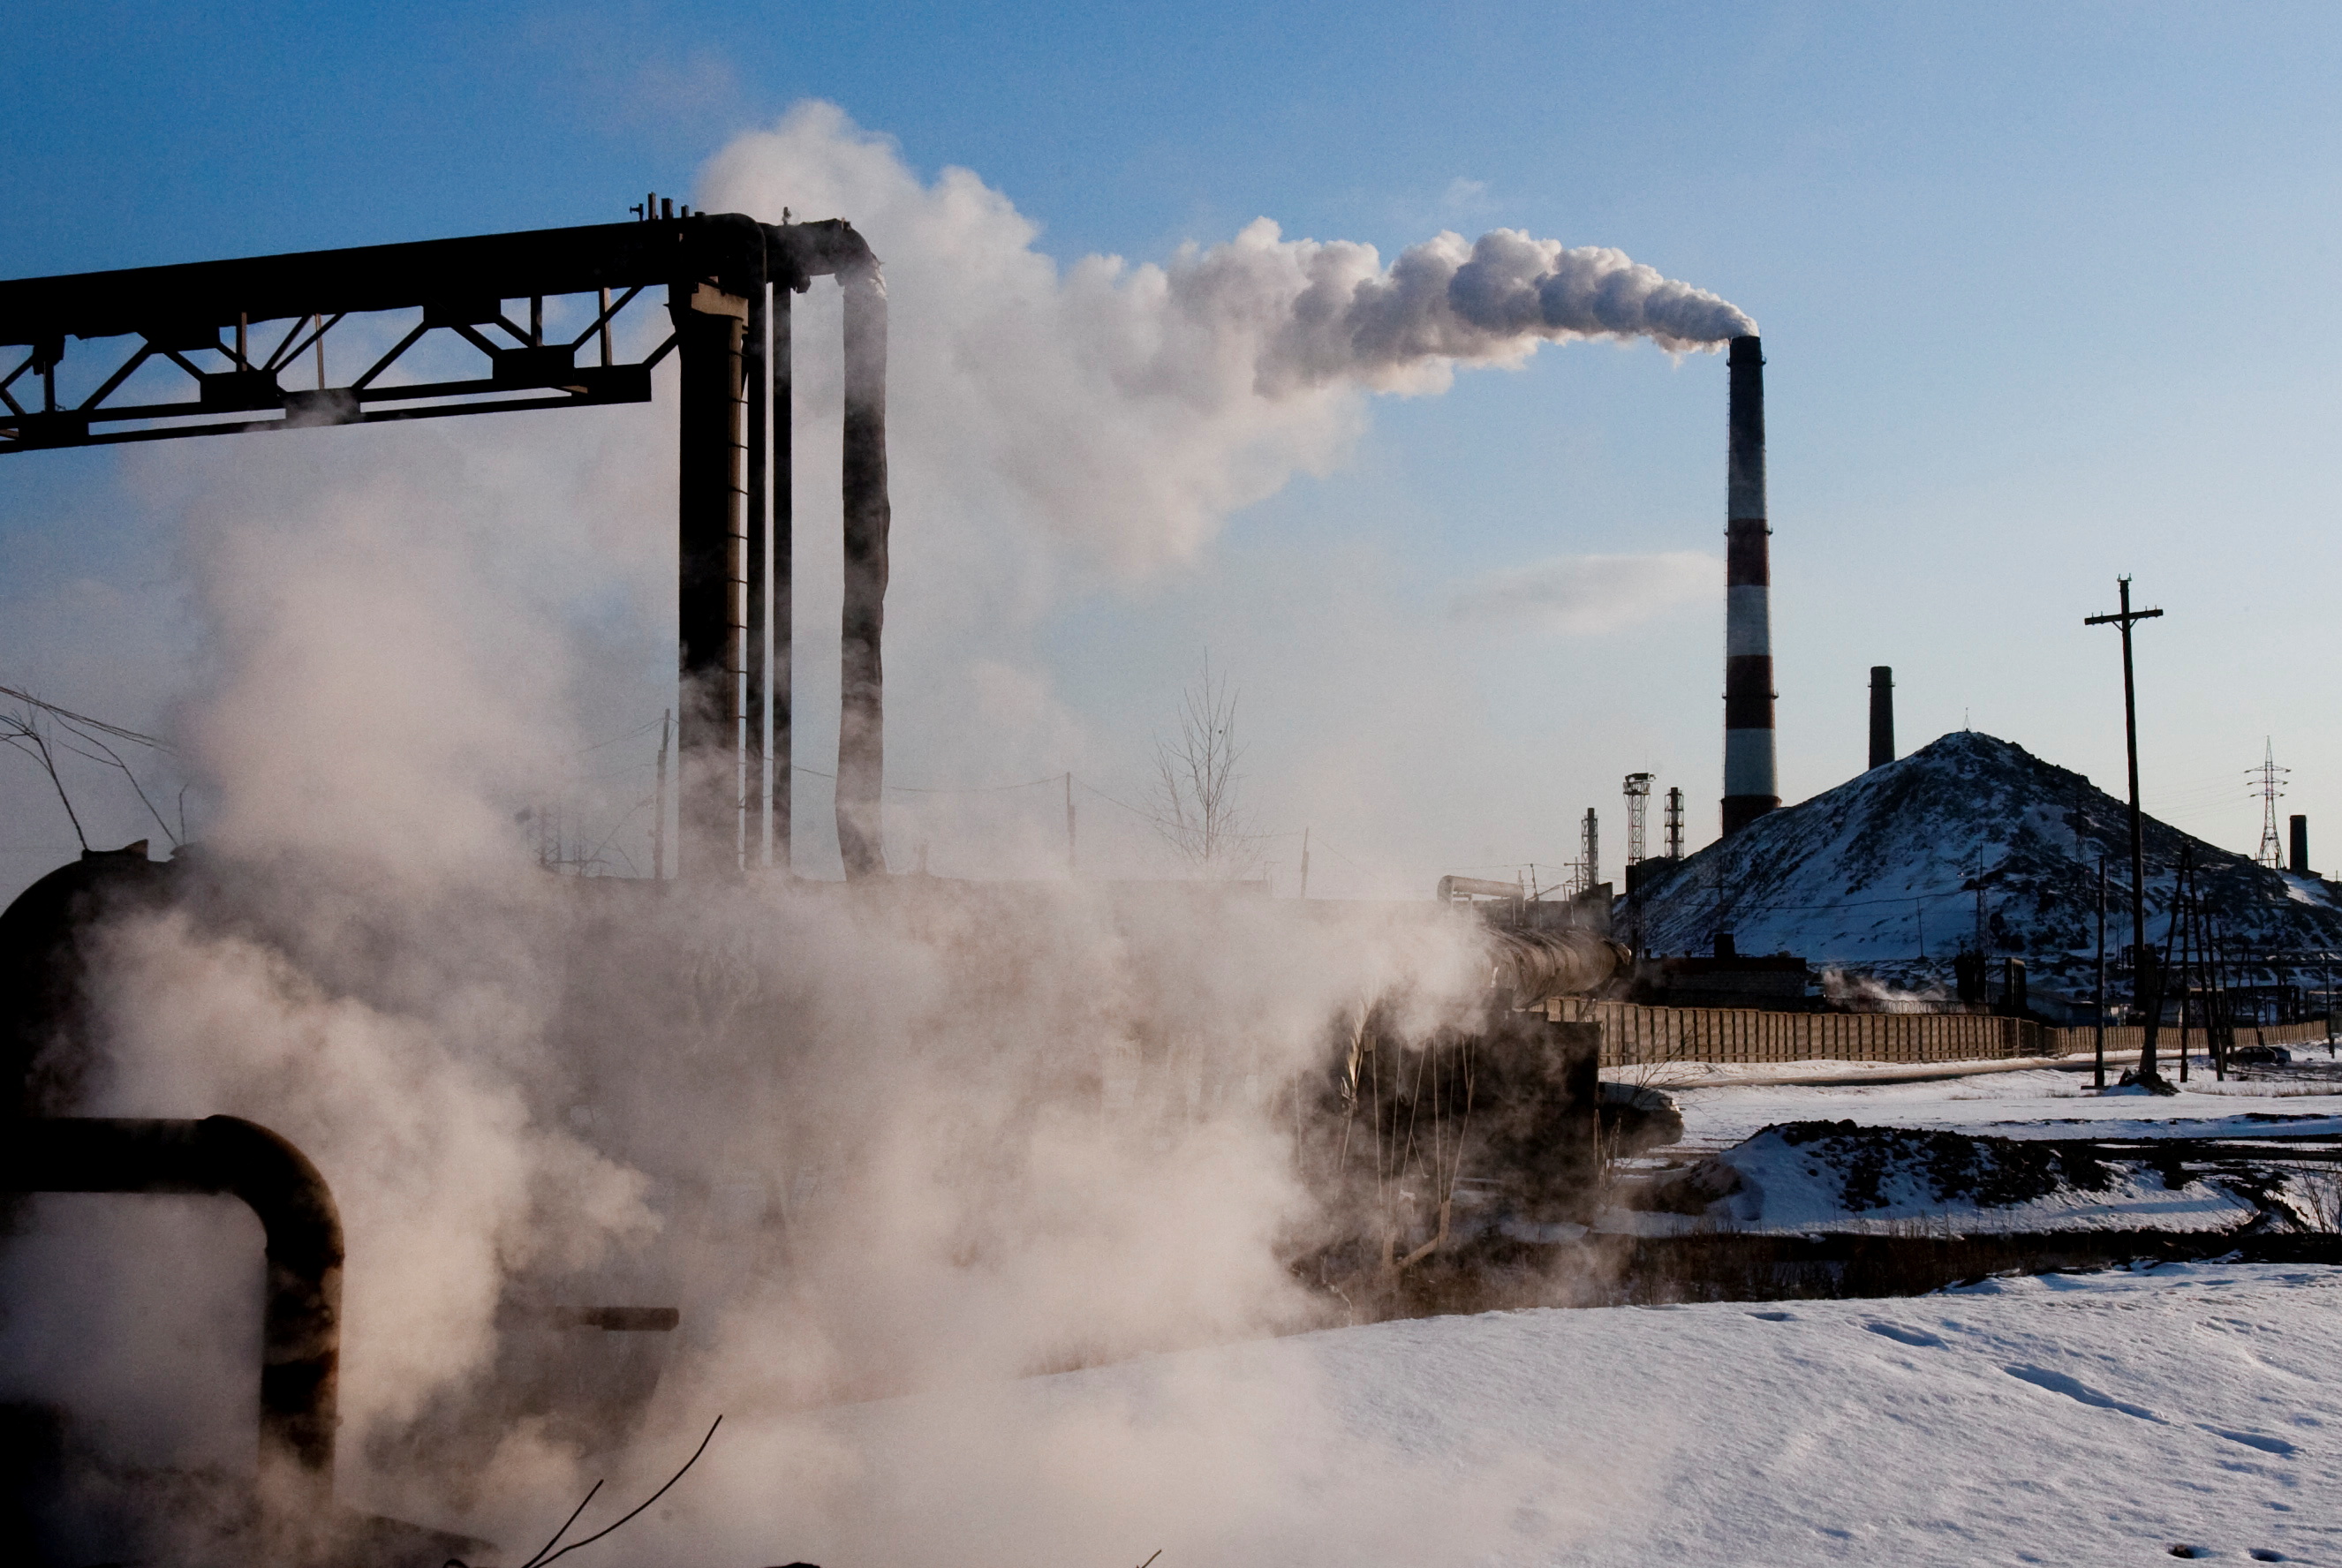 Smokes billows from the Karabashmed copper smelter in the Urals town of Karabash